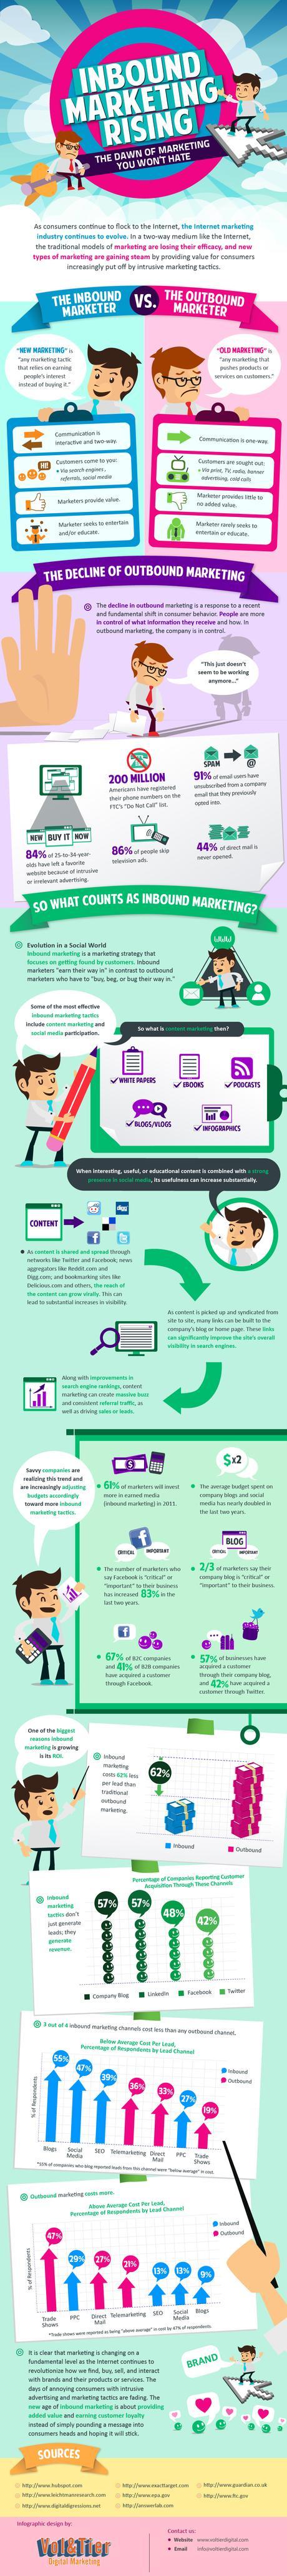 Inbound Marketing: Getting Found By Customers Infographic